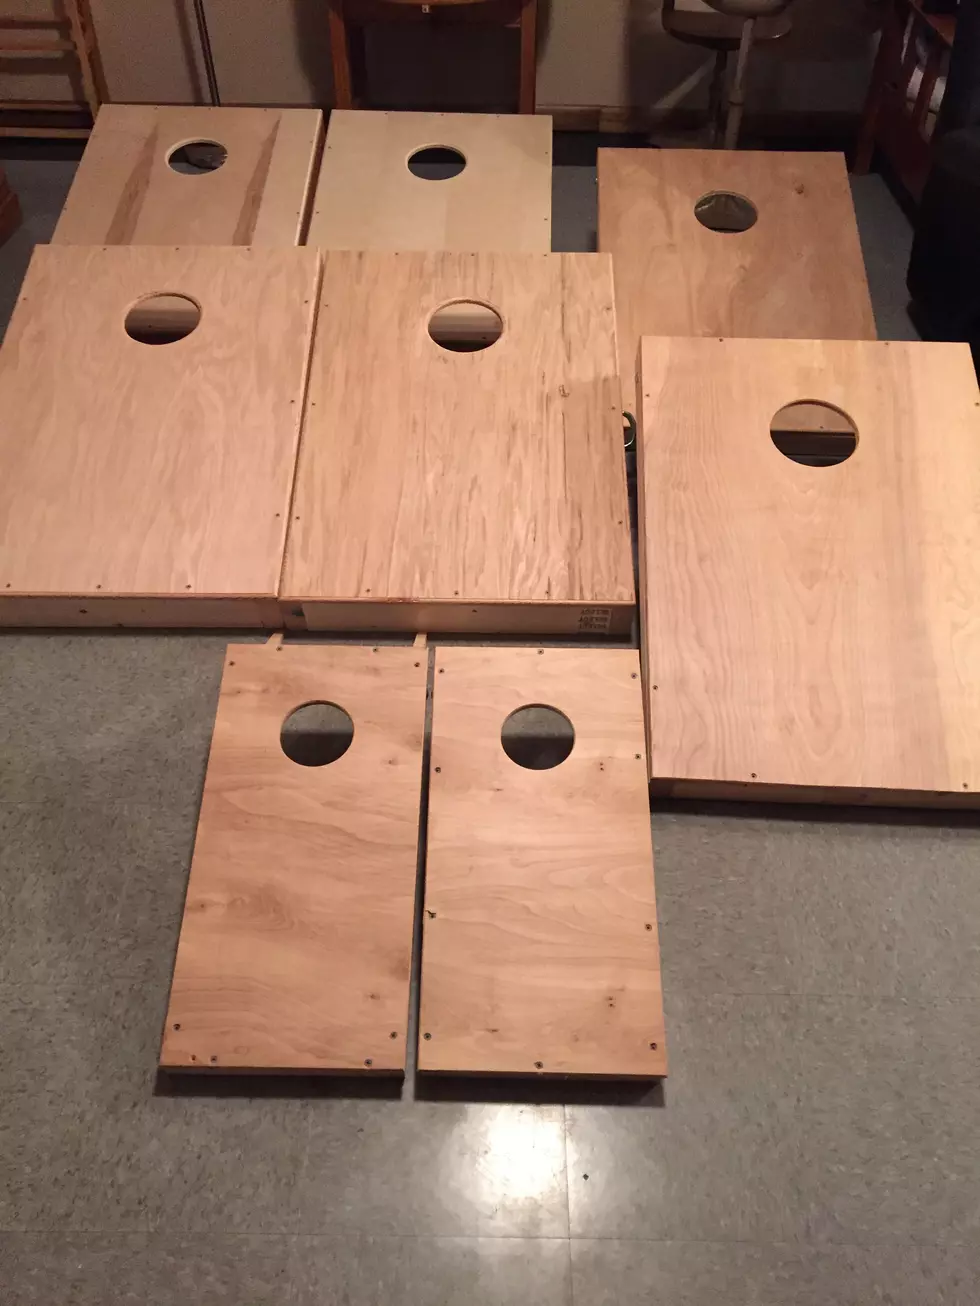 Louie G Is At It Again Making Corn Hole Game Boards